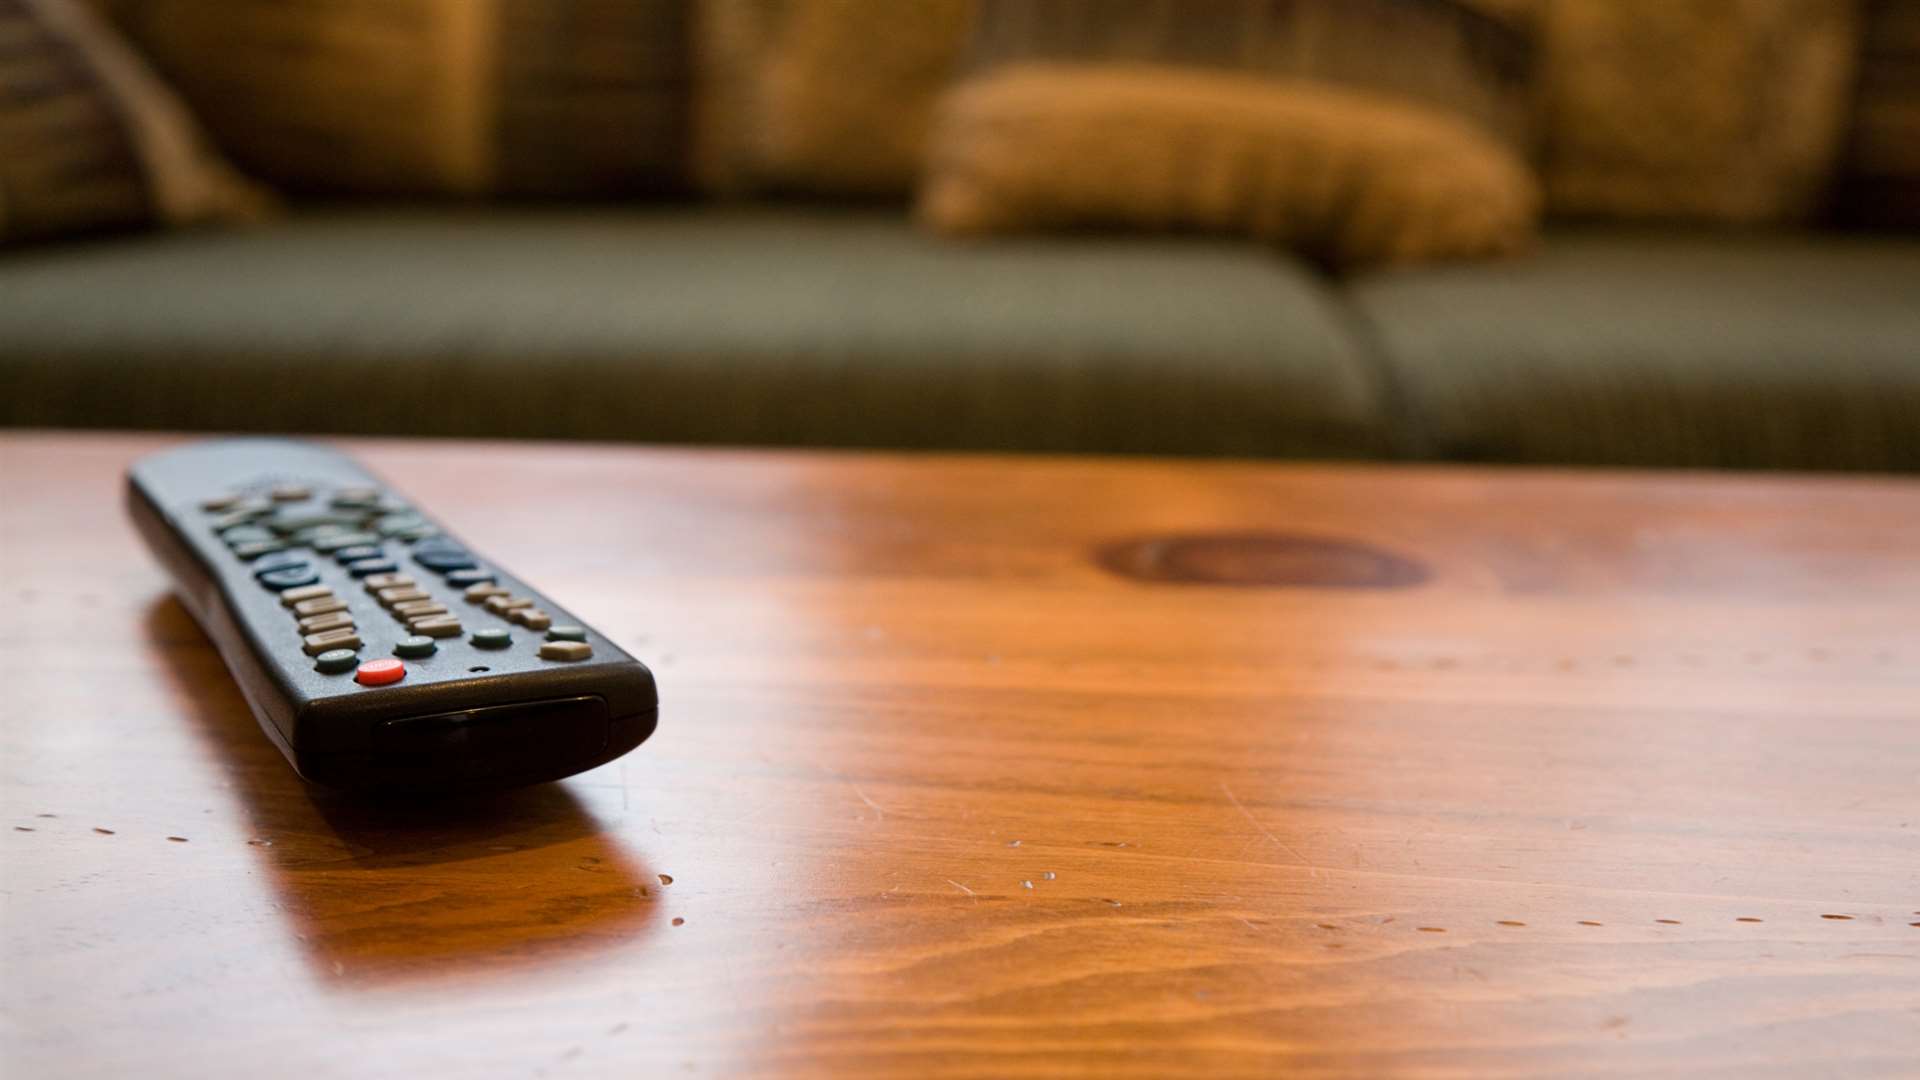 Why is the TV remote always just out of reach?